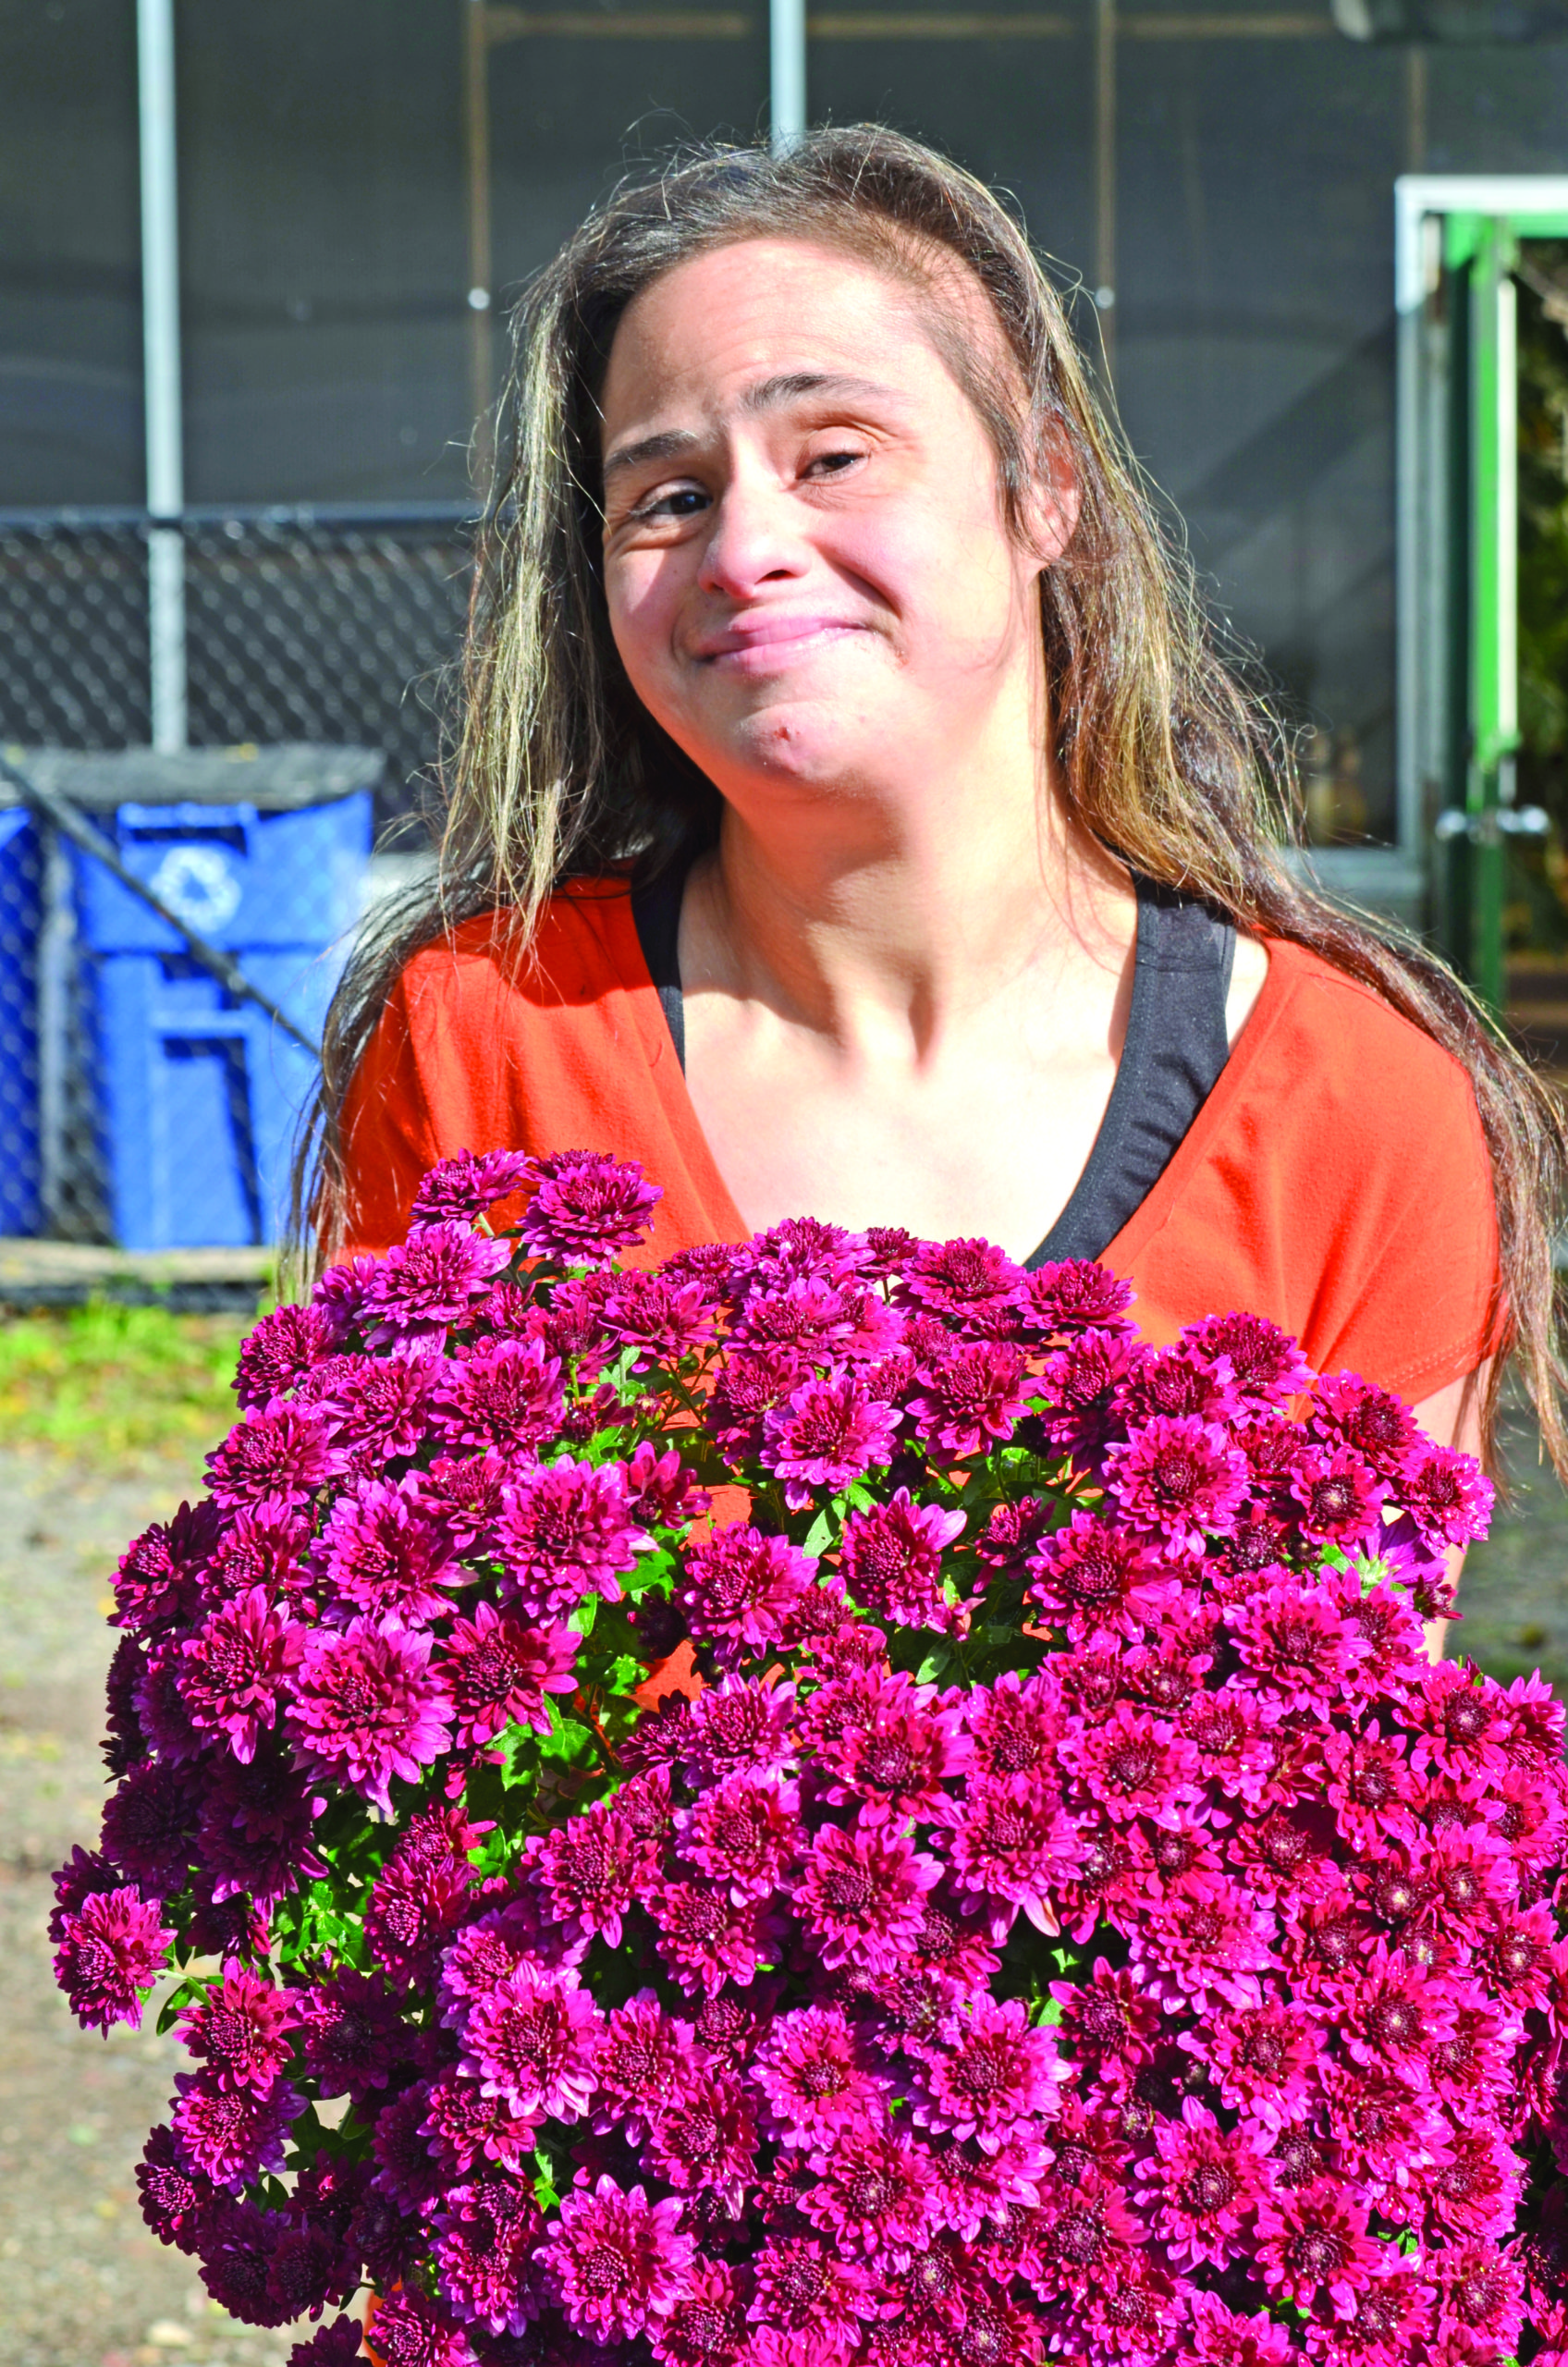 An employee at Smile Farms in Moriches. KIM COVELL